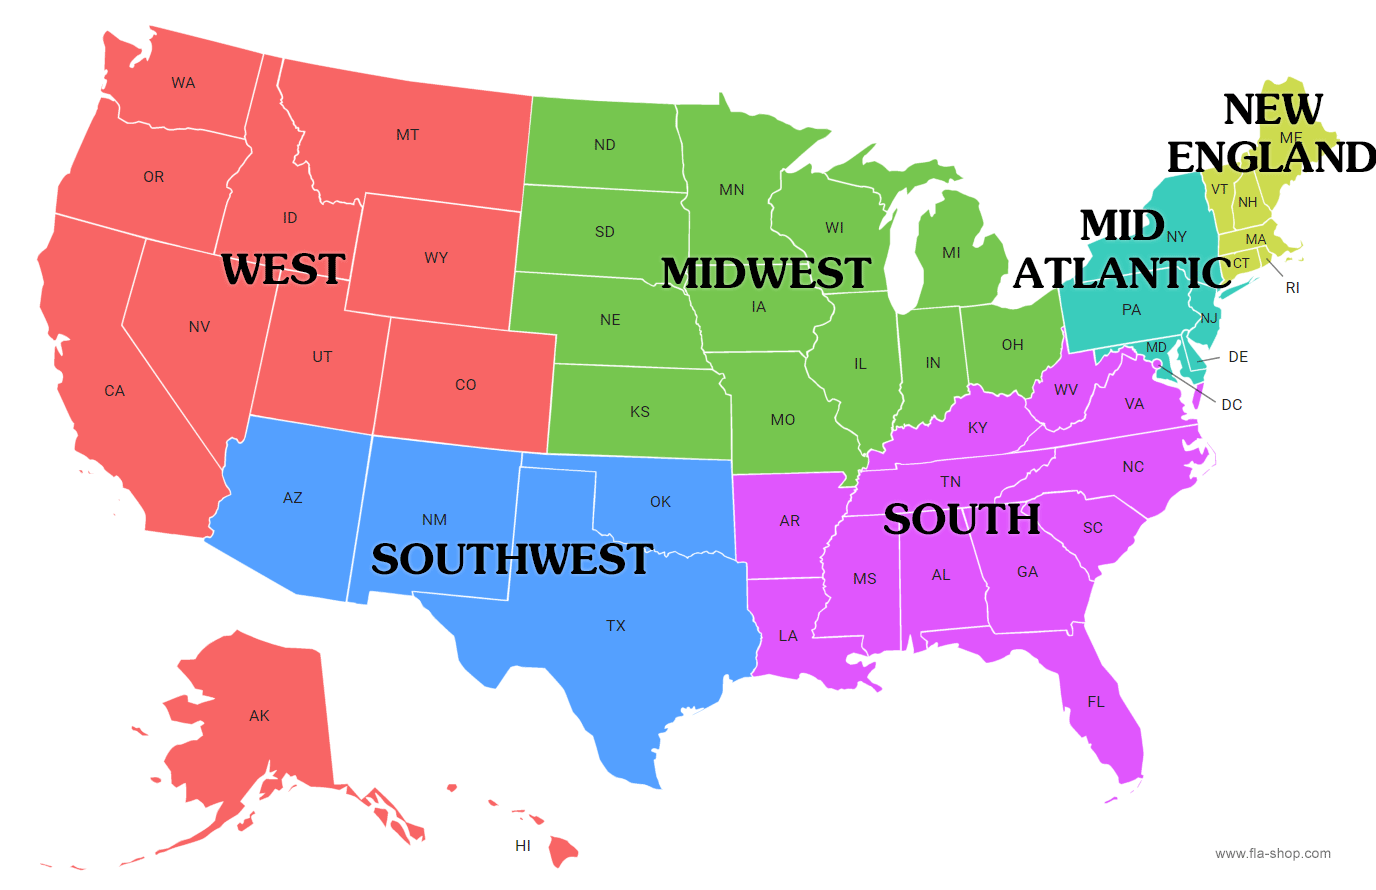 Map of the U.S. with 6 regions